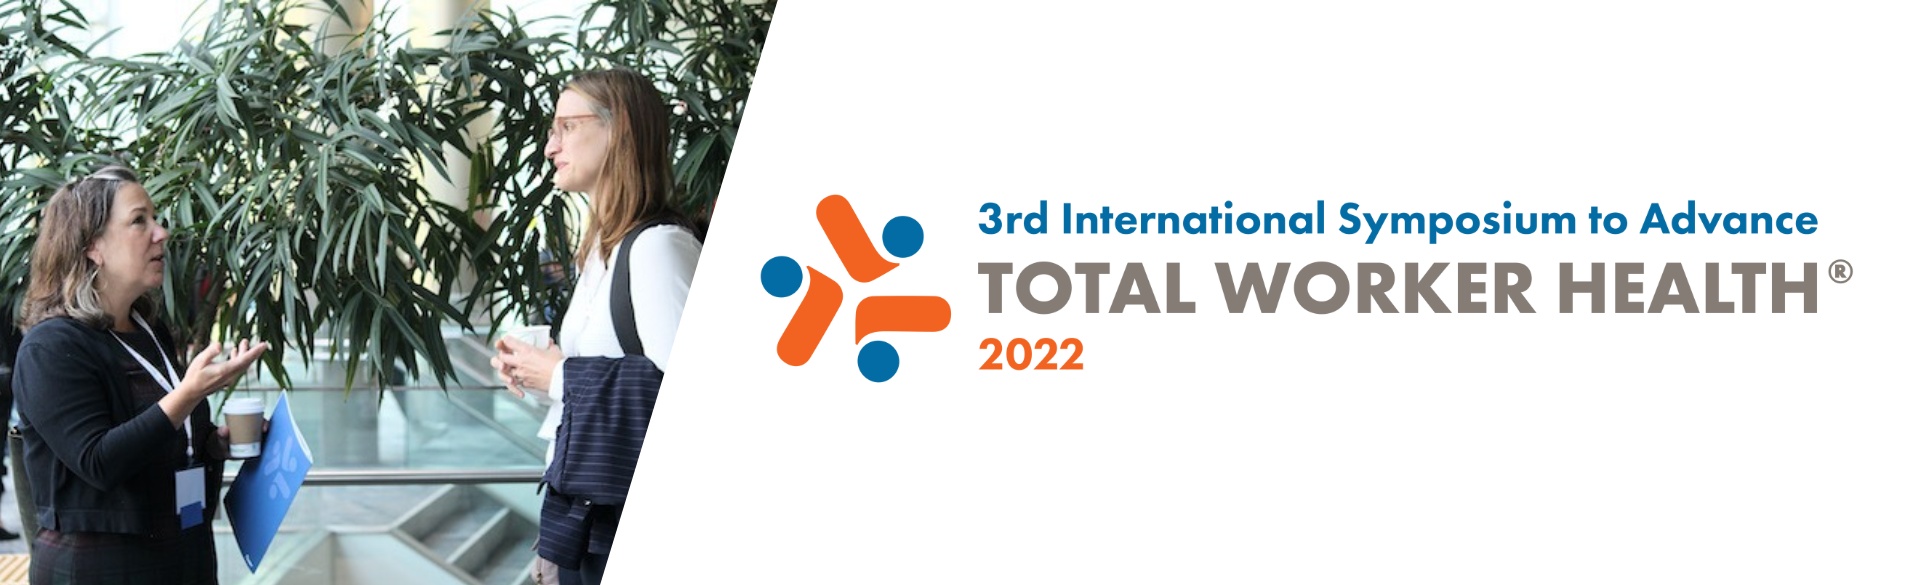 two colleagues talking with international total worker health symposium logo